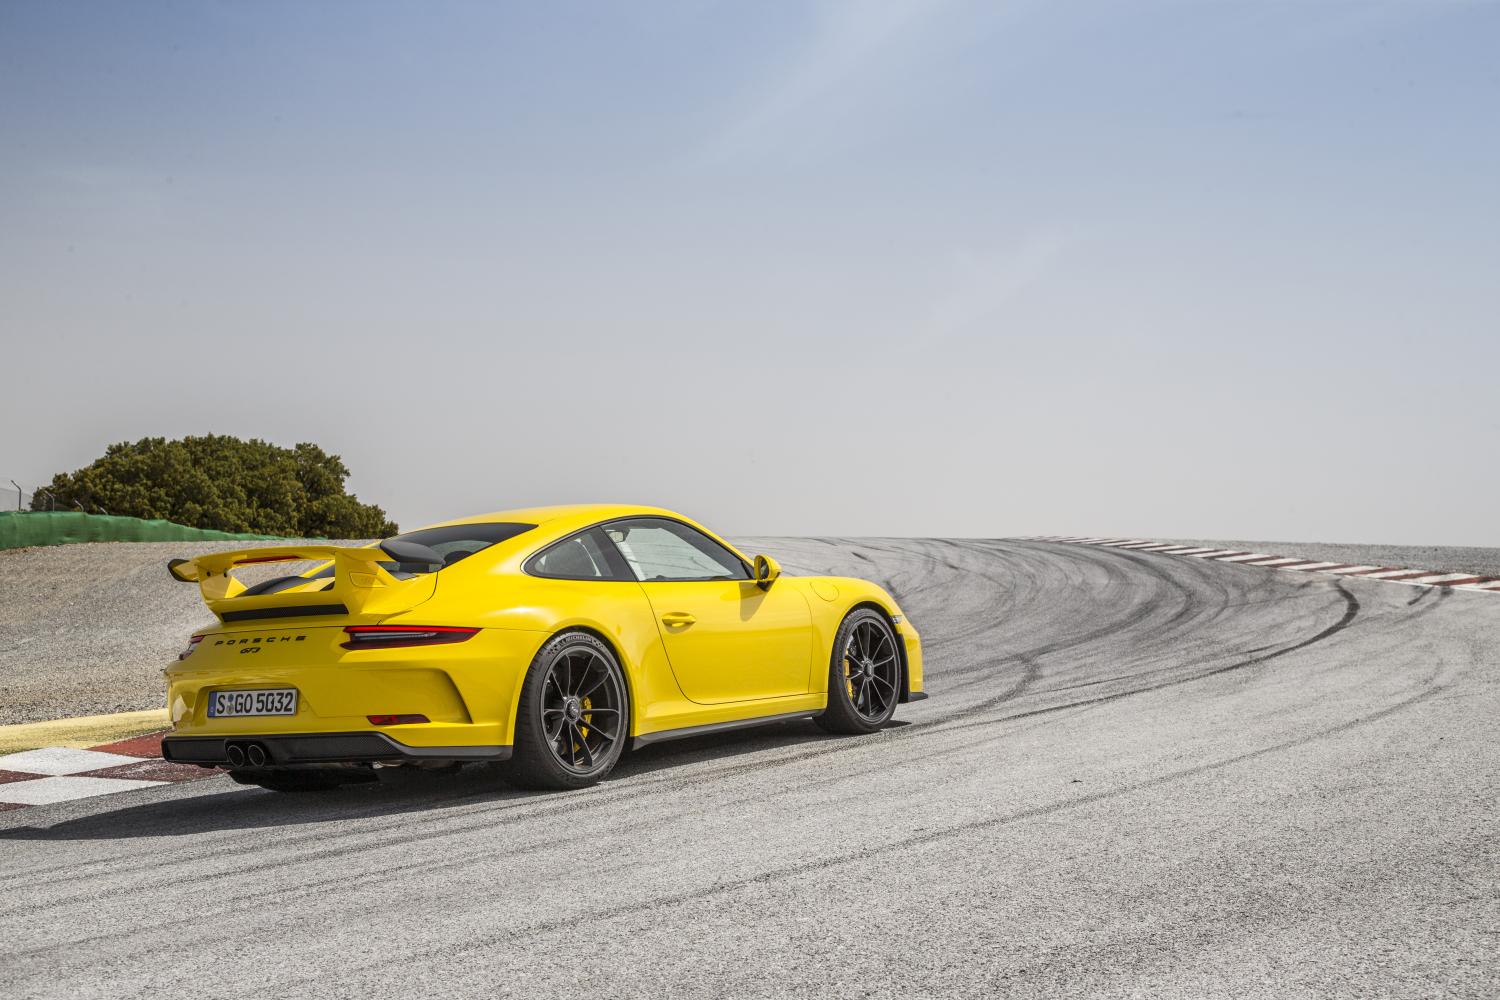 2018 Porsche 911 GT3 Manual Review: Believe The Ridiculous Hype